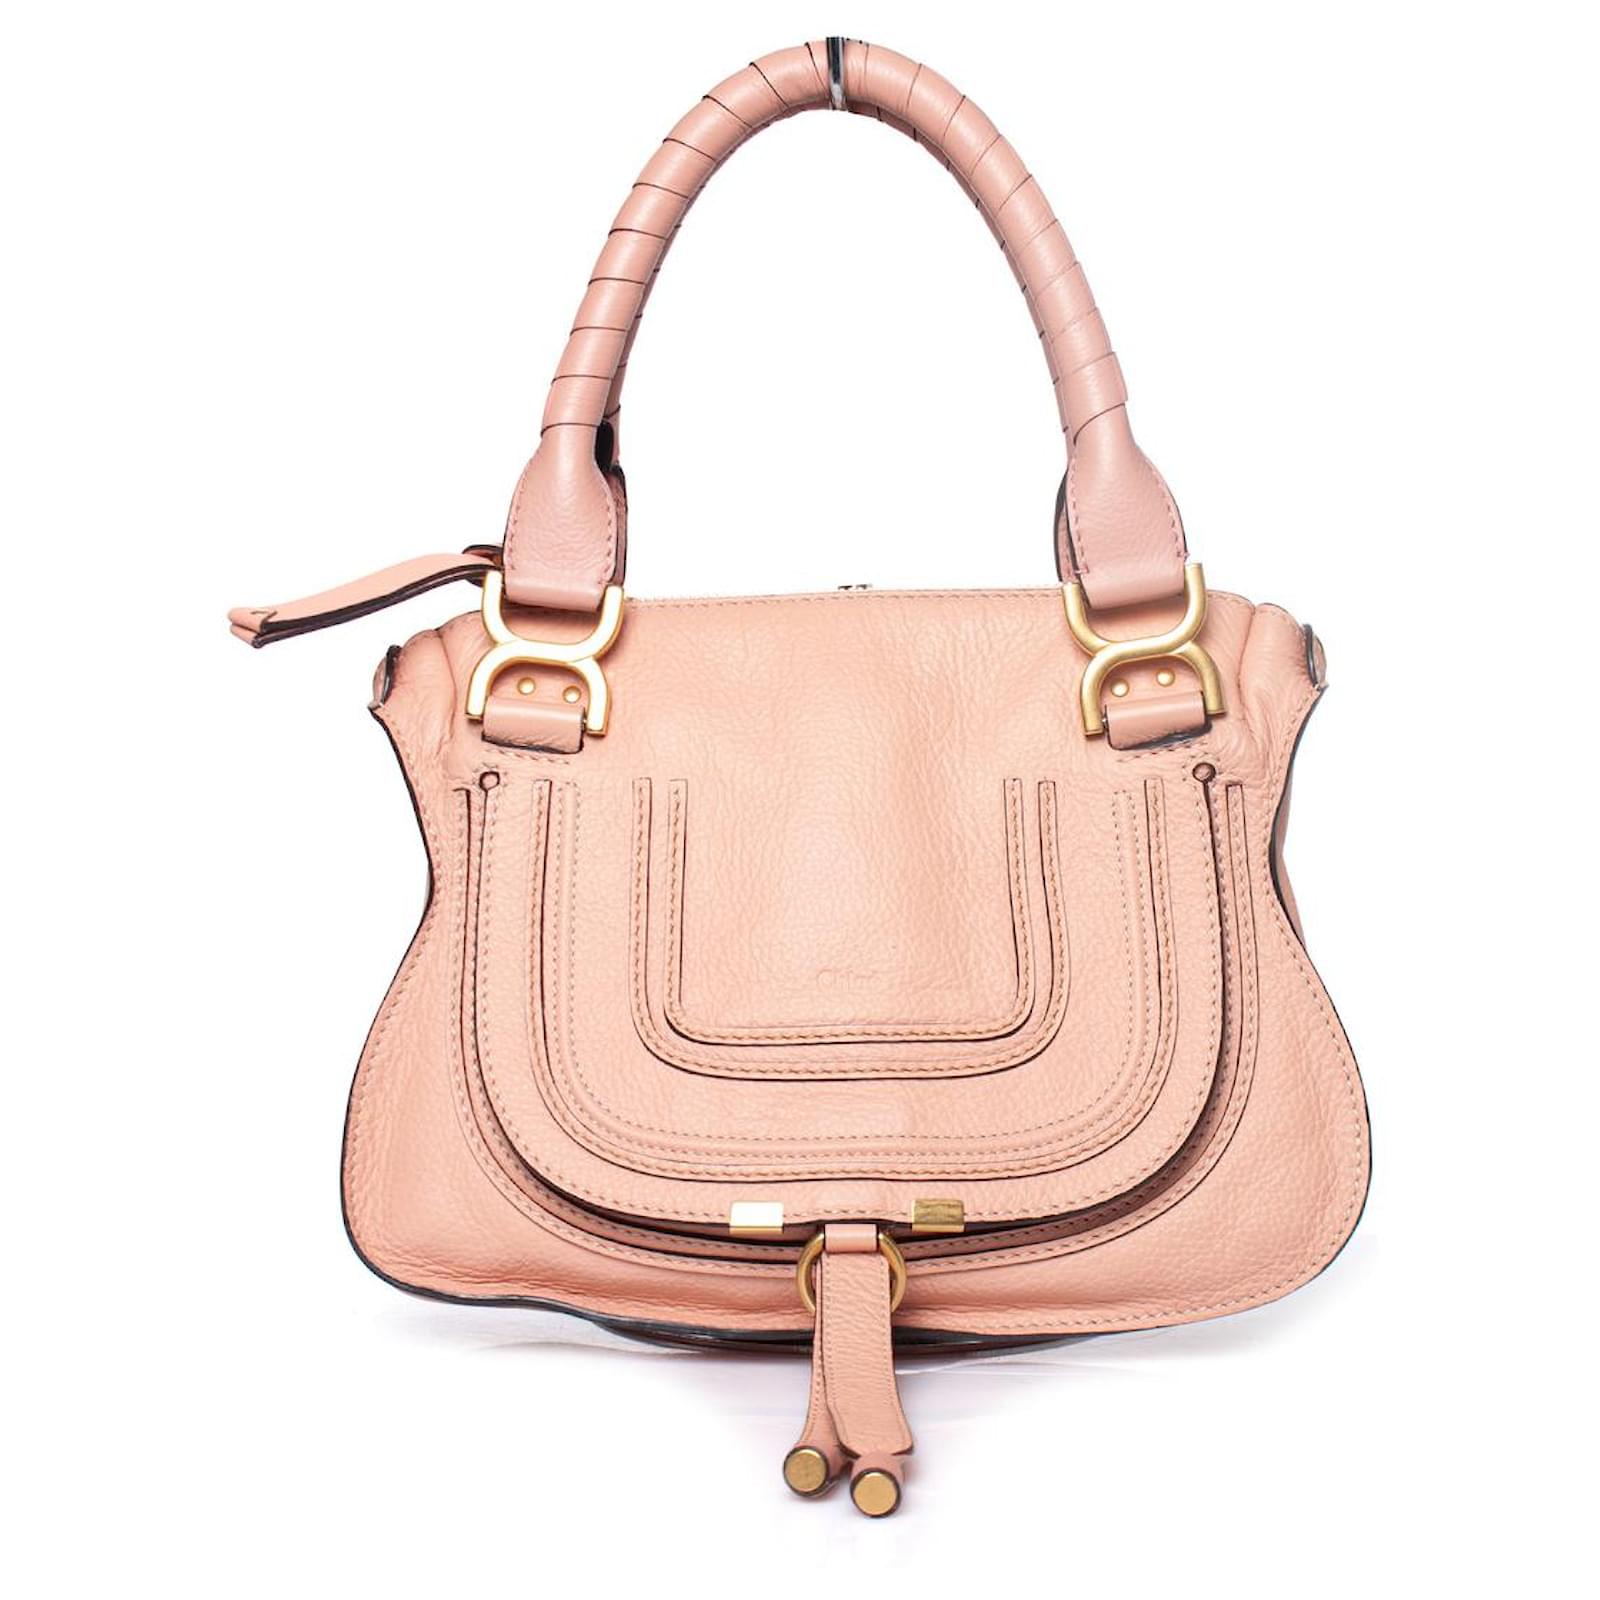 Designer Pink Two Swallow Shoulder Bag With Chain Strap And Flap Closure  Luxury Leather Hot Pink Tote Bag For Women From Lightluxurybag55, $20.82 |  DHgate.Com